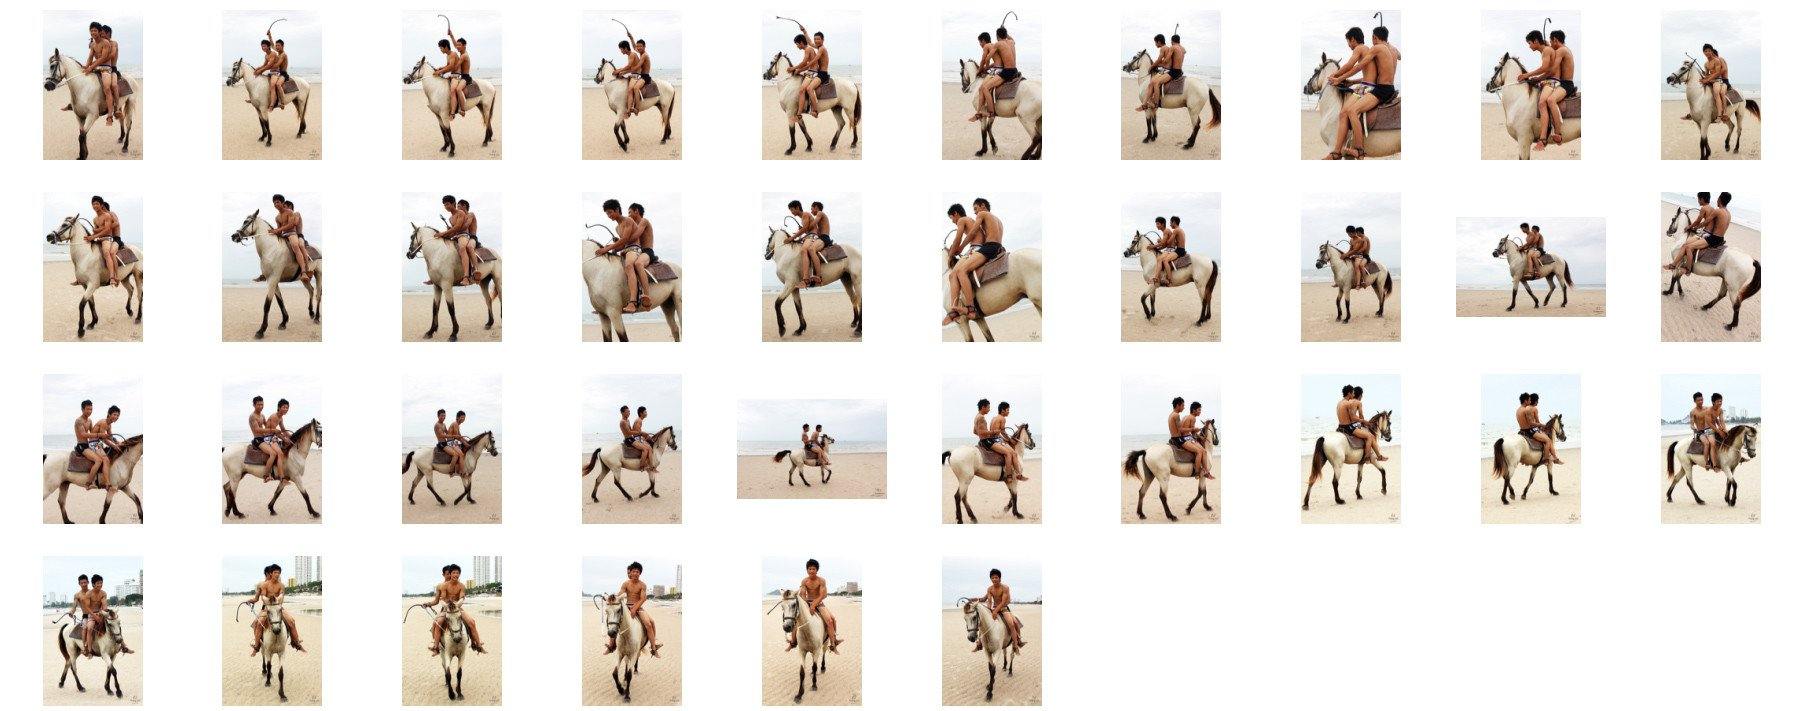 David and Thaksin in Shorts Riding Double with Saddle on Buckskin Horse, Part 10 - Riding.Vision